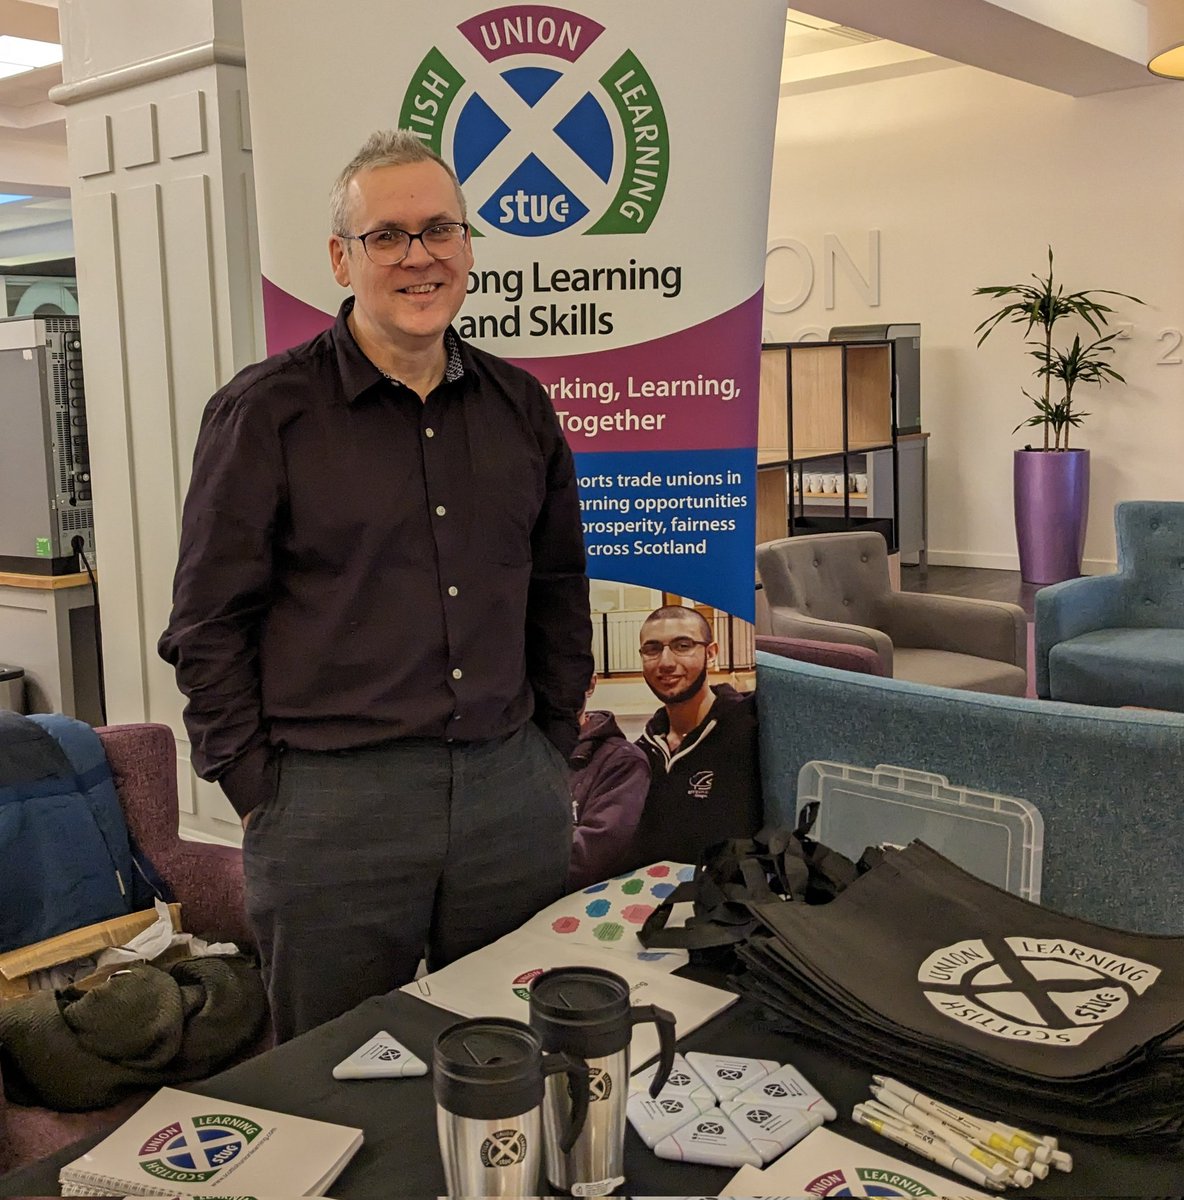 Great to be at #stucdwc23 Drop by @UnionLearning's stall for a chat and a freebie or two.